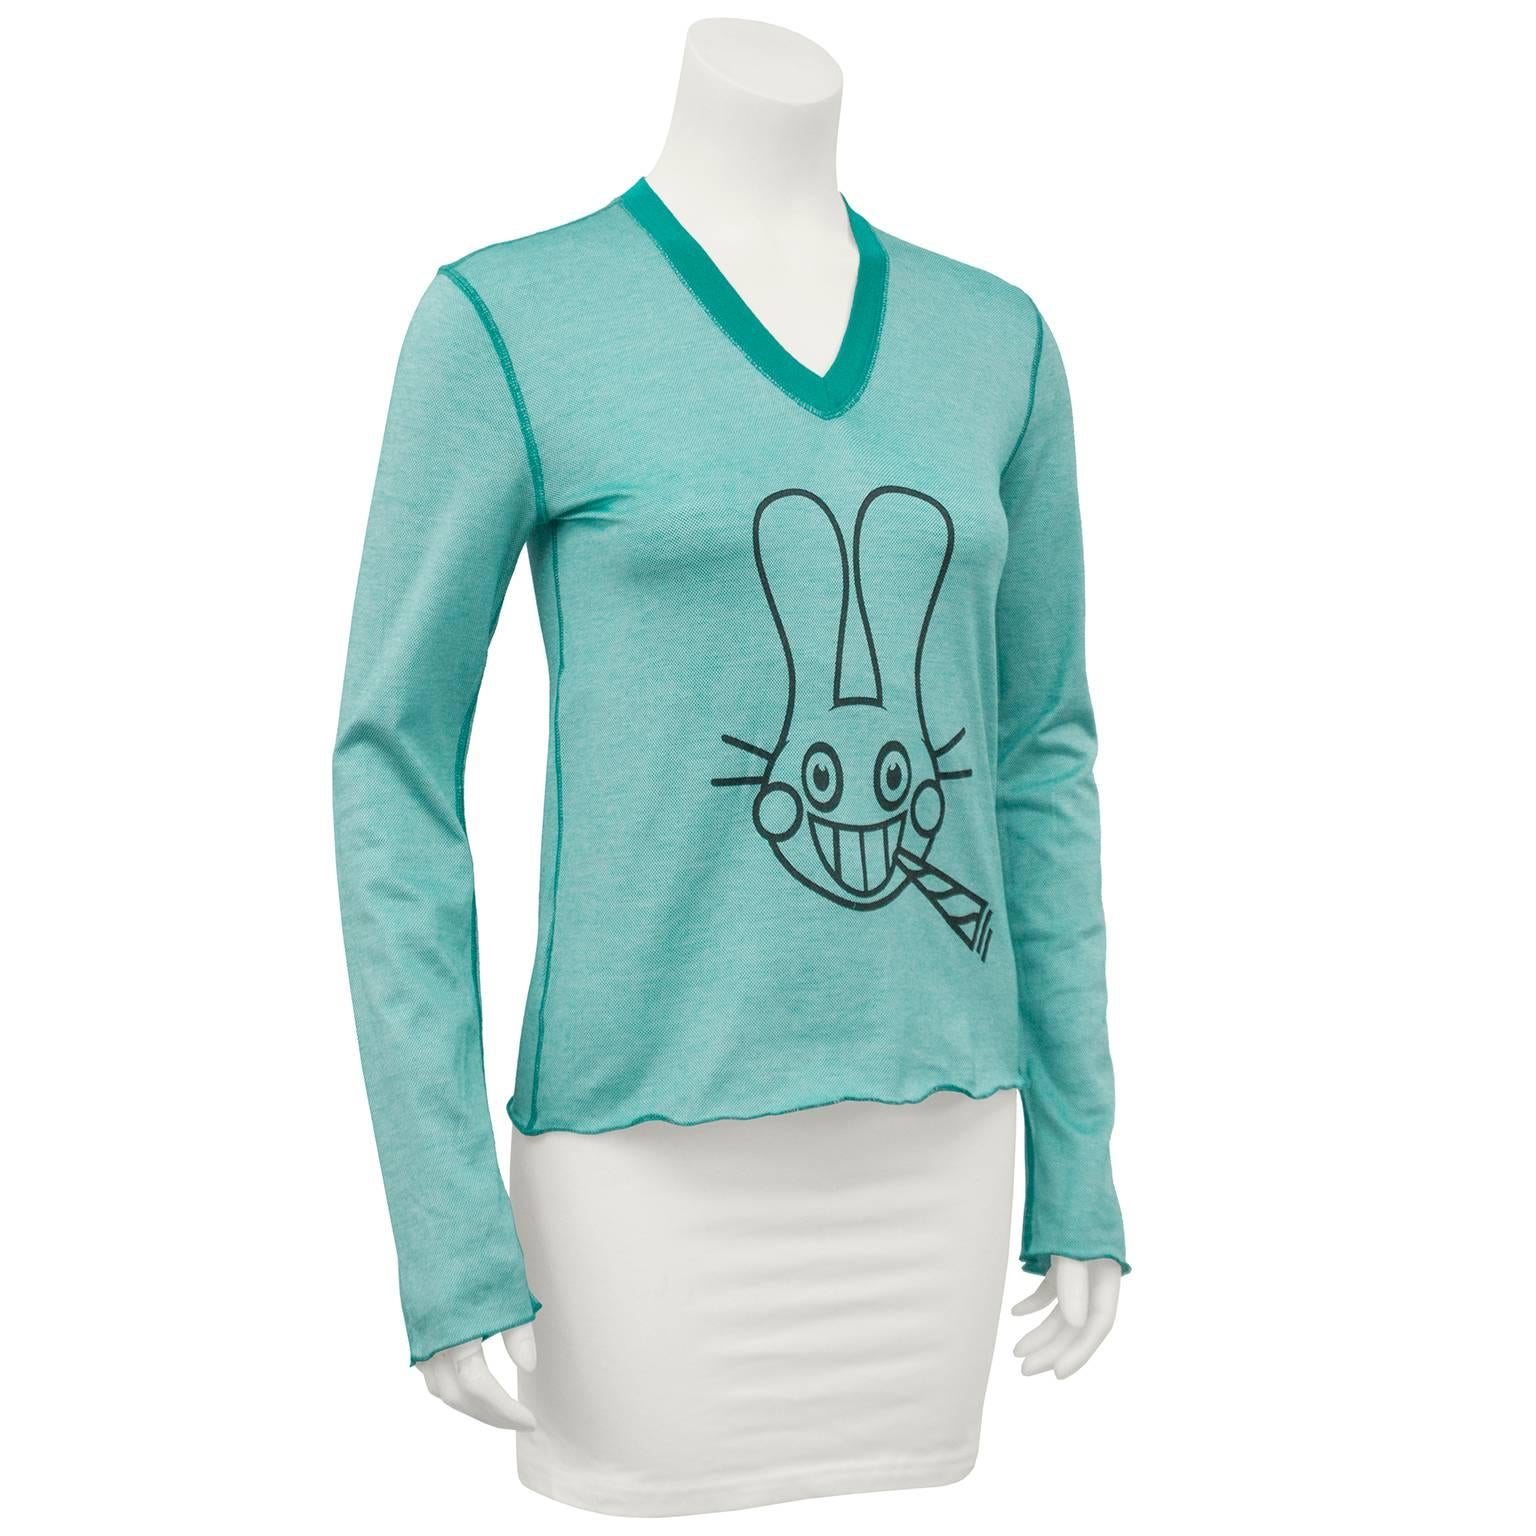 Long sleeve, v neck, teal cotton shirt from the spring/summer 2003 Lucien Pellat-Finet collection with teal top stitching. Large black cartoon bunny graphic printed in middle. Excellent vintage condition. Size small. 

Sleeve 23